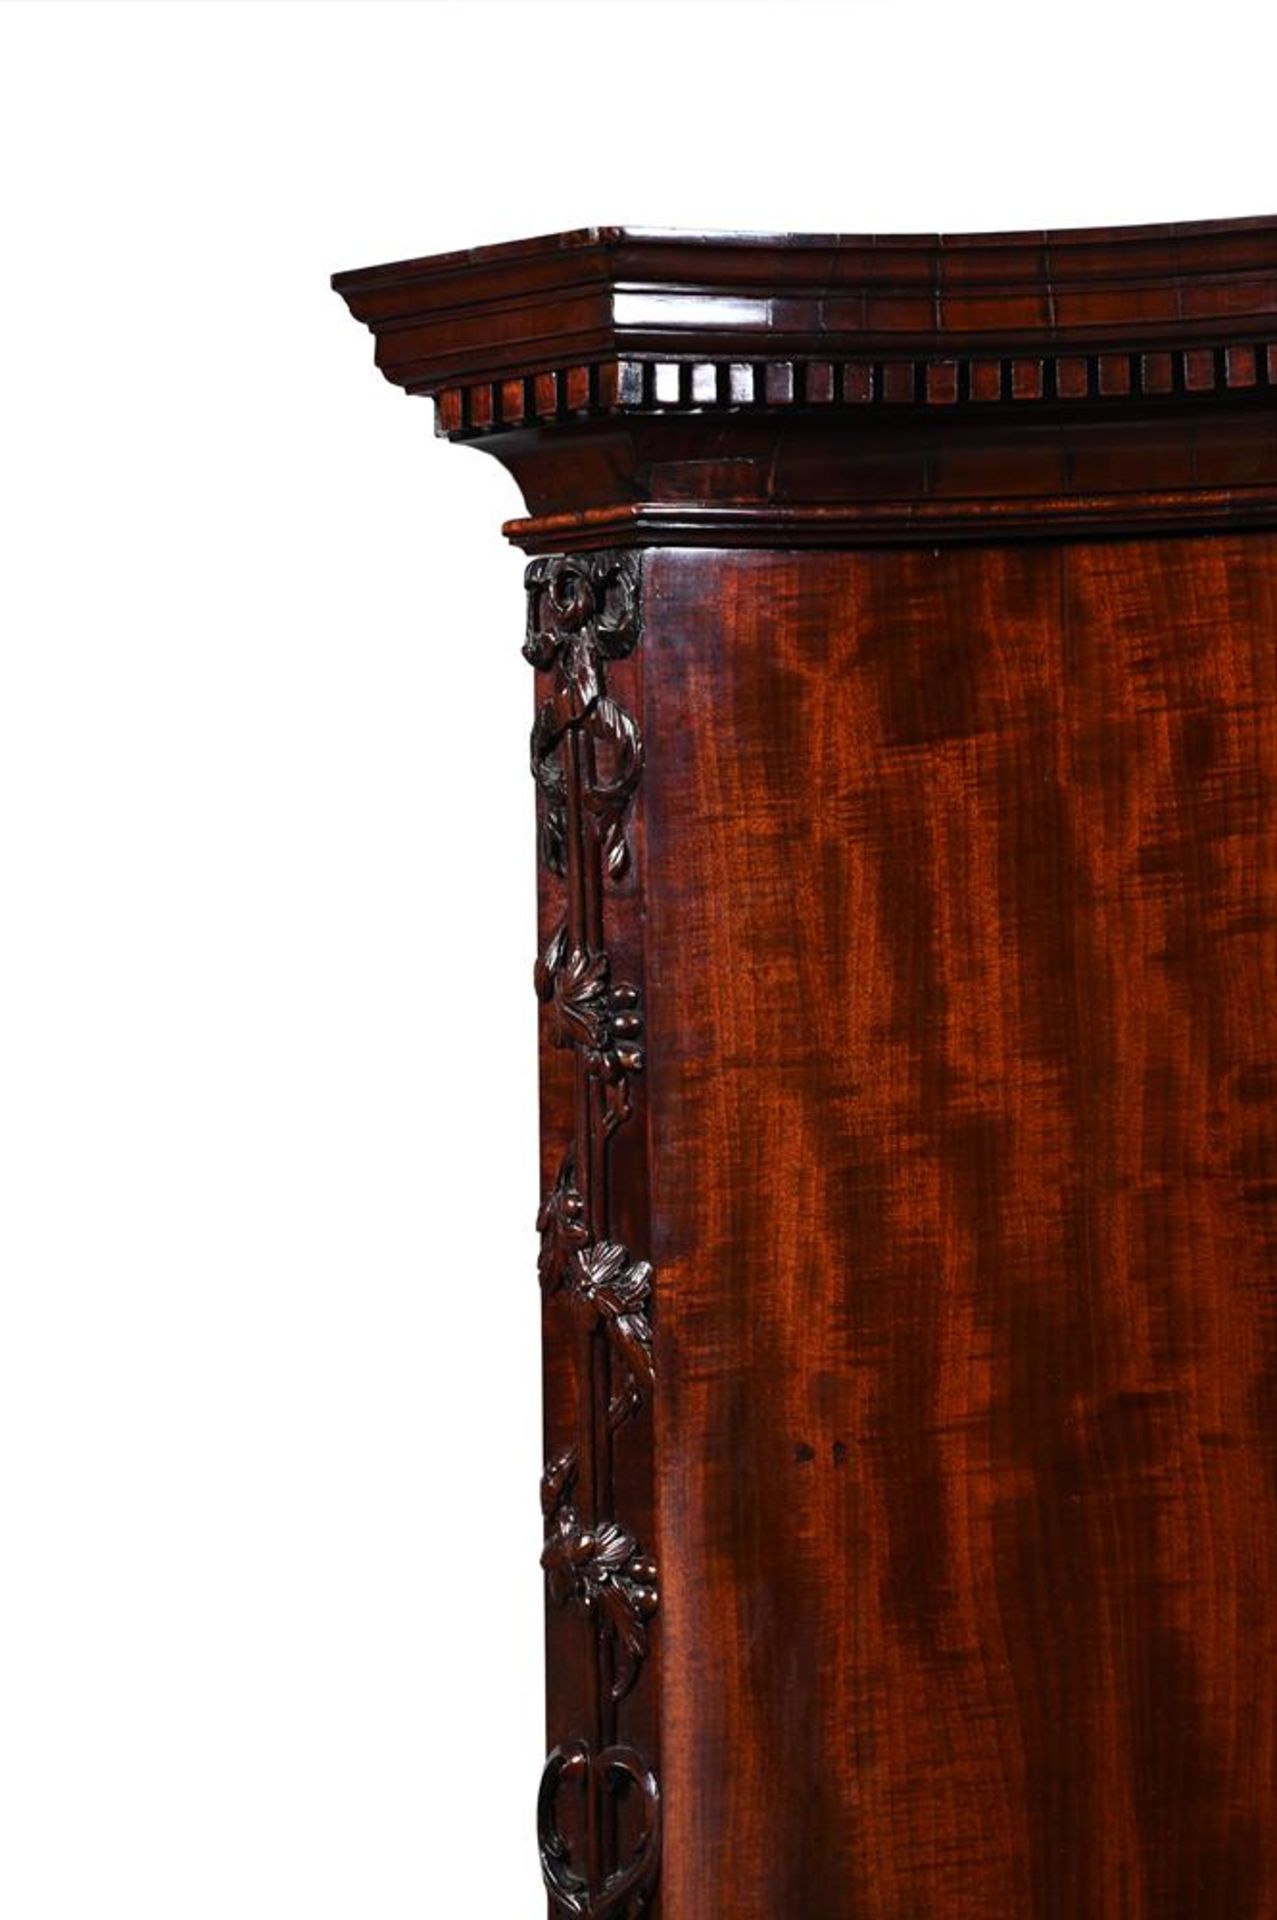 A GEORGE III FIGURED AND CARVED MAHOGANY SERPENTINE CLOTHES PRESS IN THE MANNER OF WILLIAM GOMM - Image 2 of 6